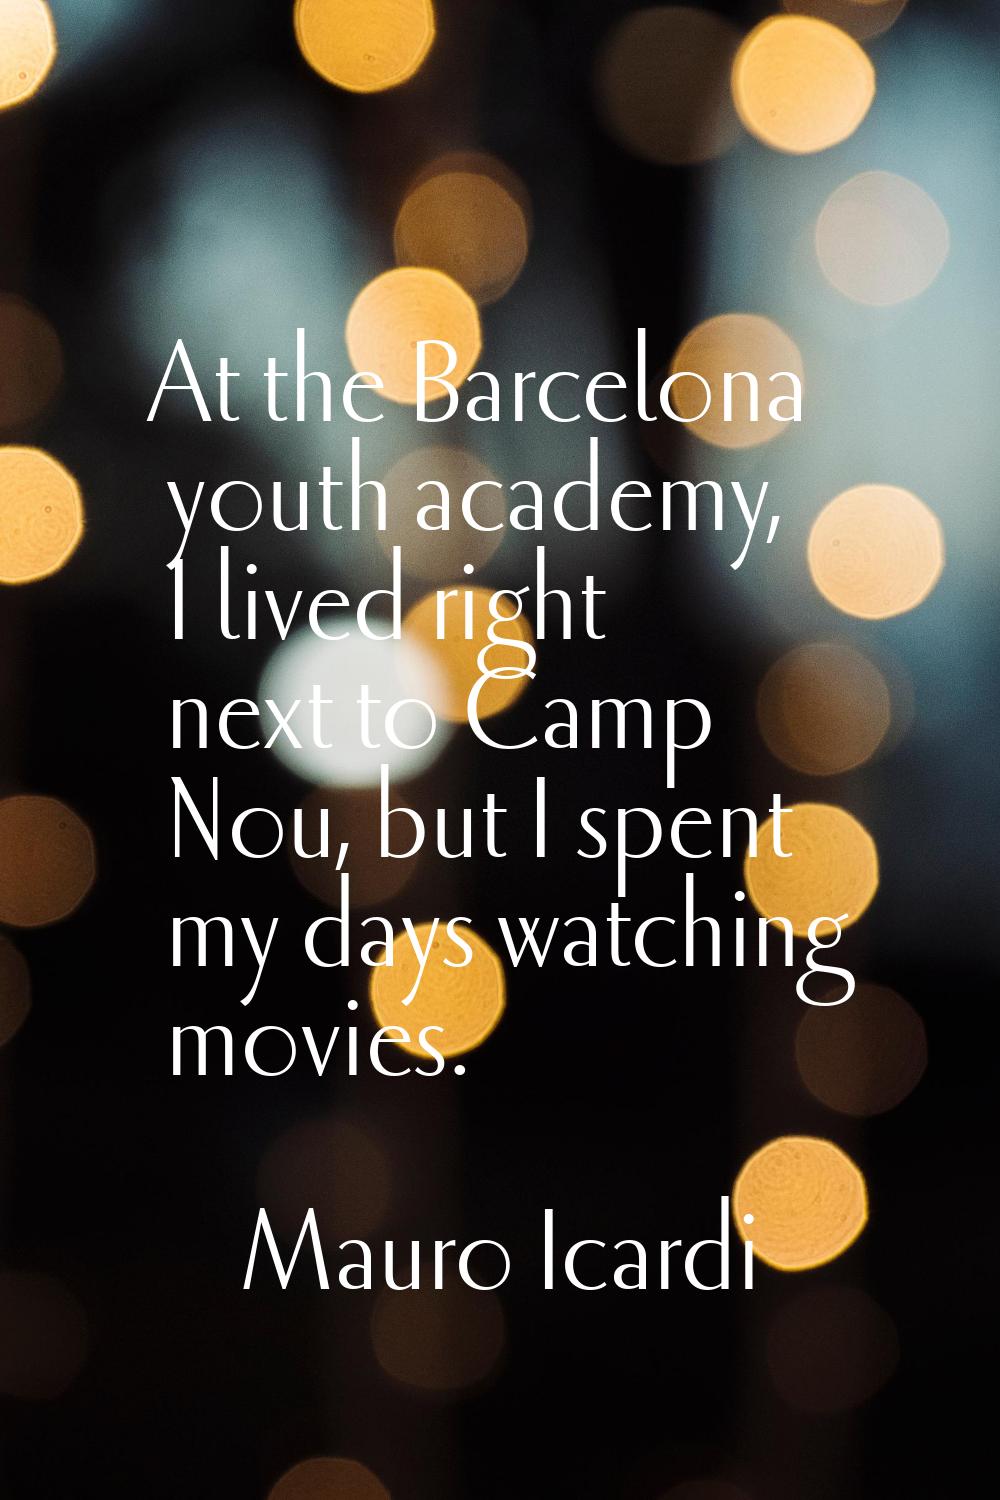 At the Barcelona youth academy, I lived right next to Camp Nou, but I spent my days watching movies